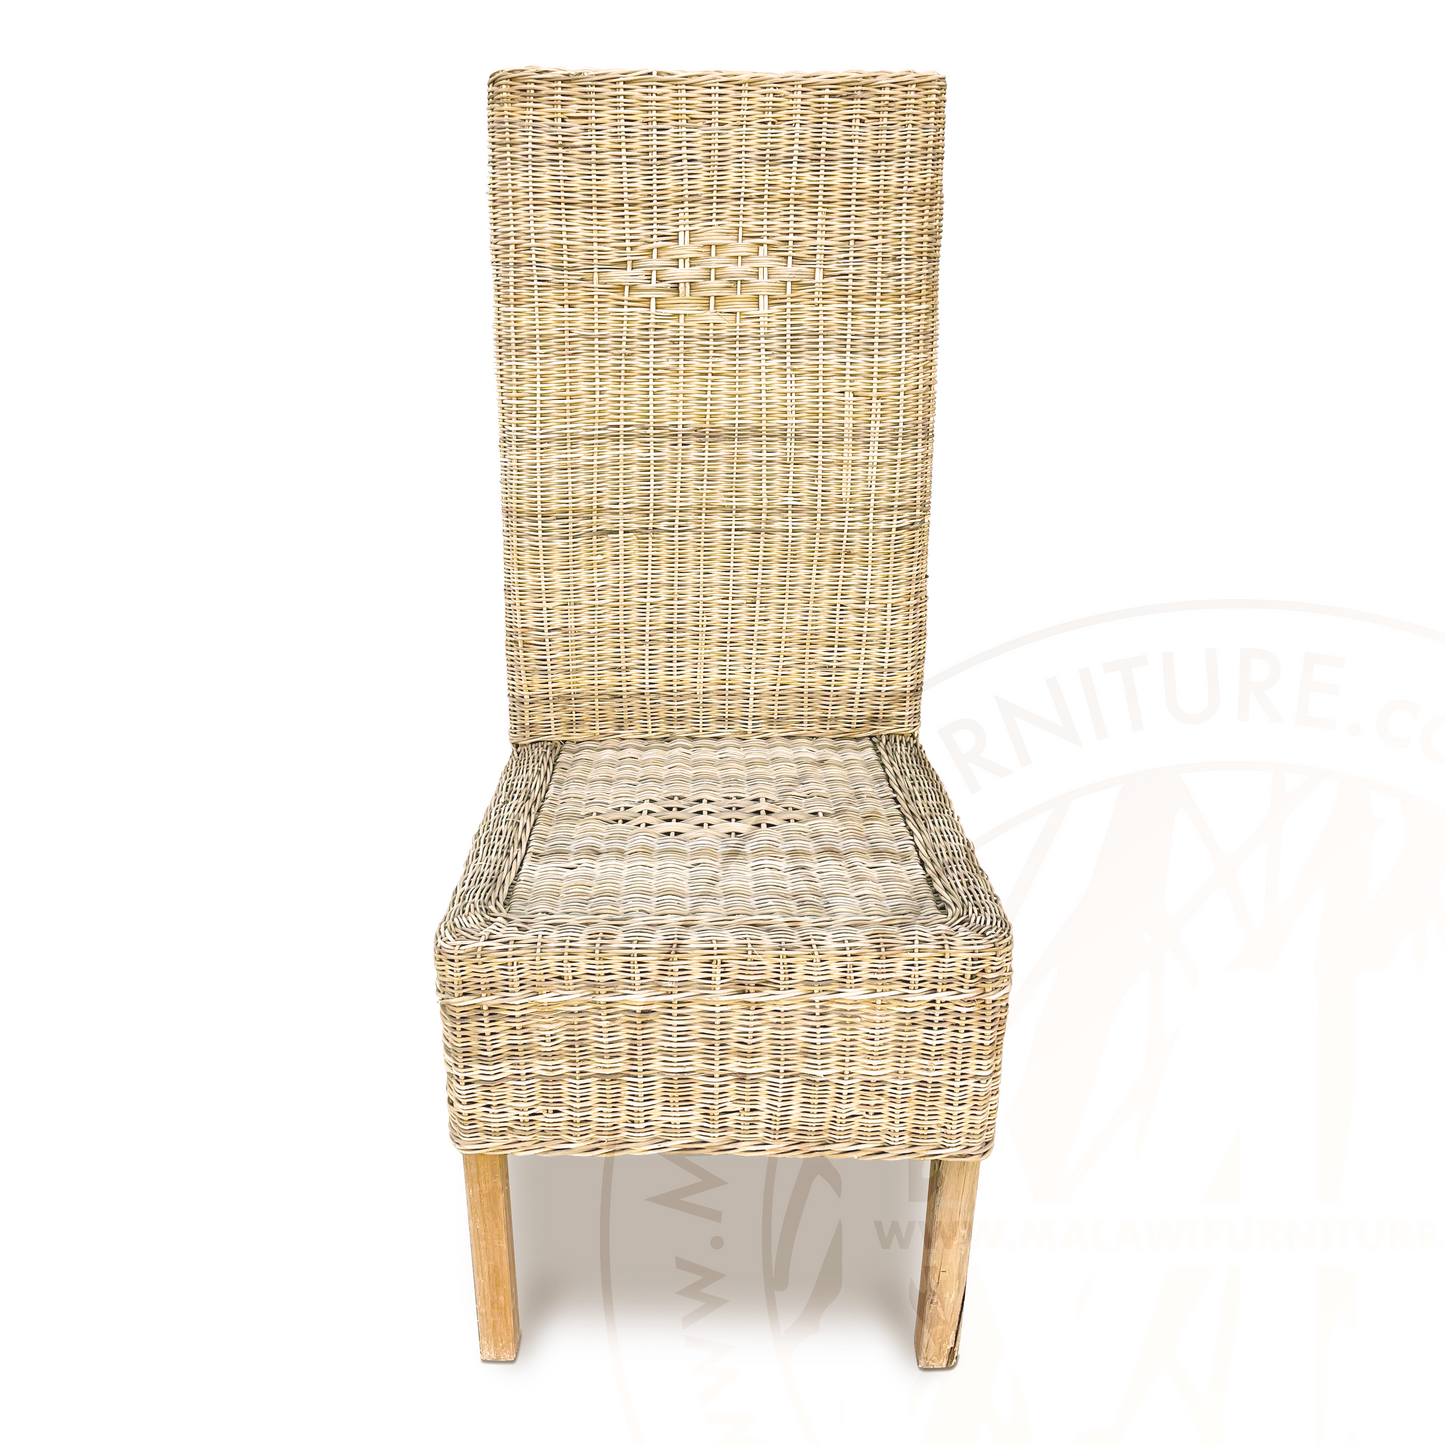 Malawi Dining Chair (Closed weave)